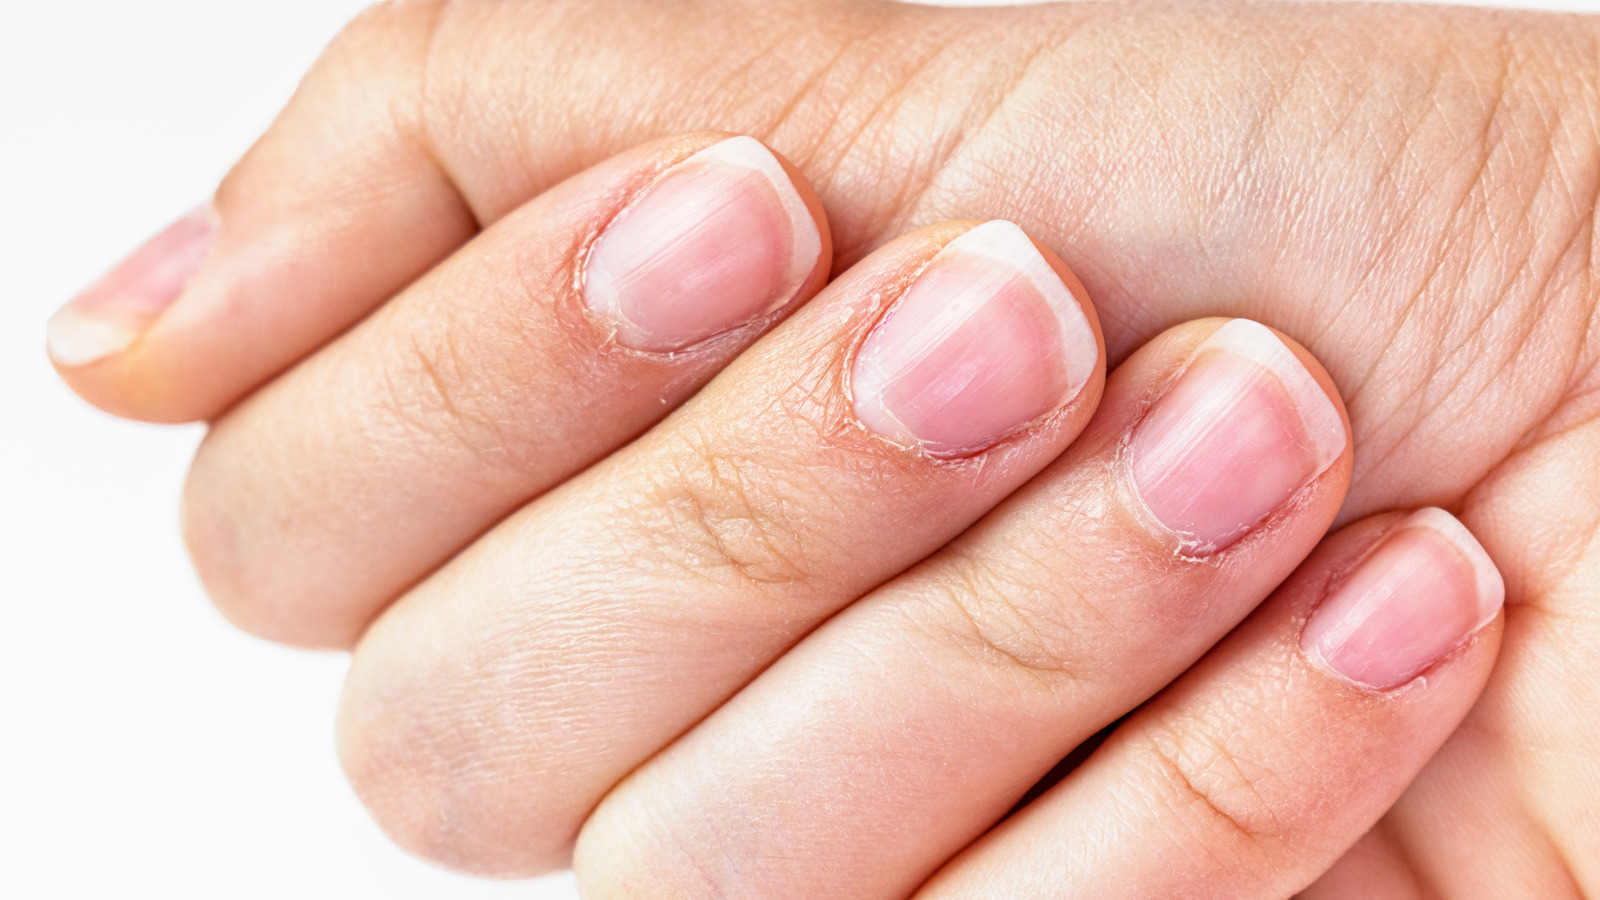 The Science Behind Why Your Fingernails Grow Faster When You're Hot